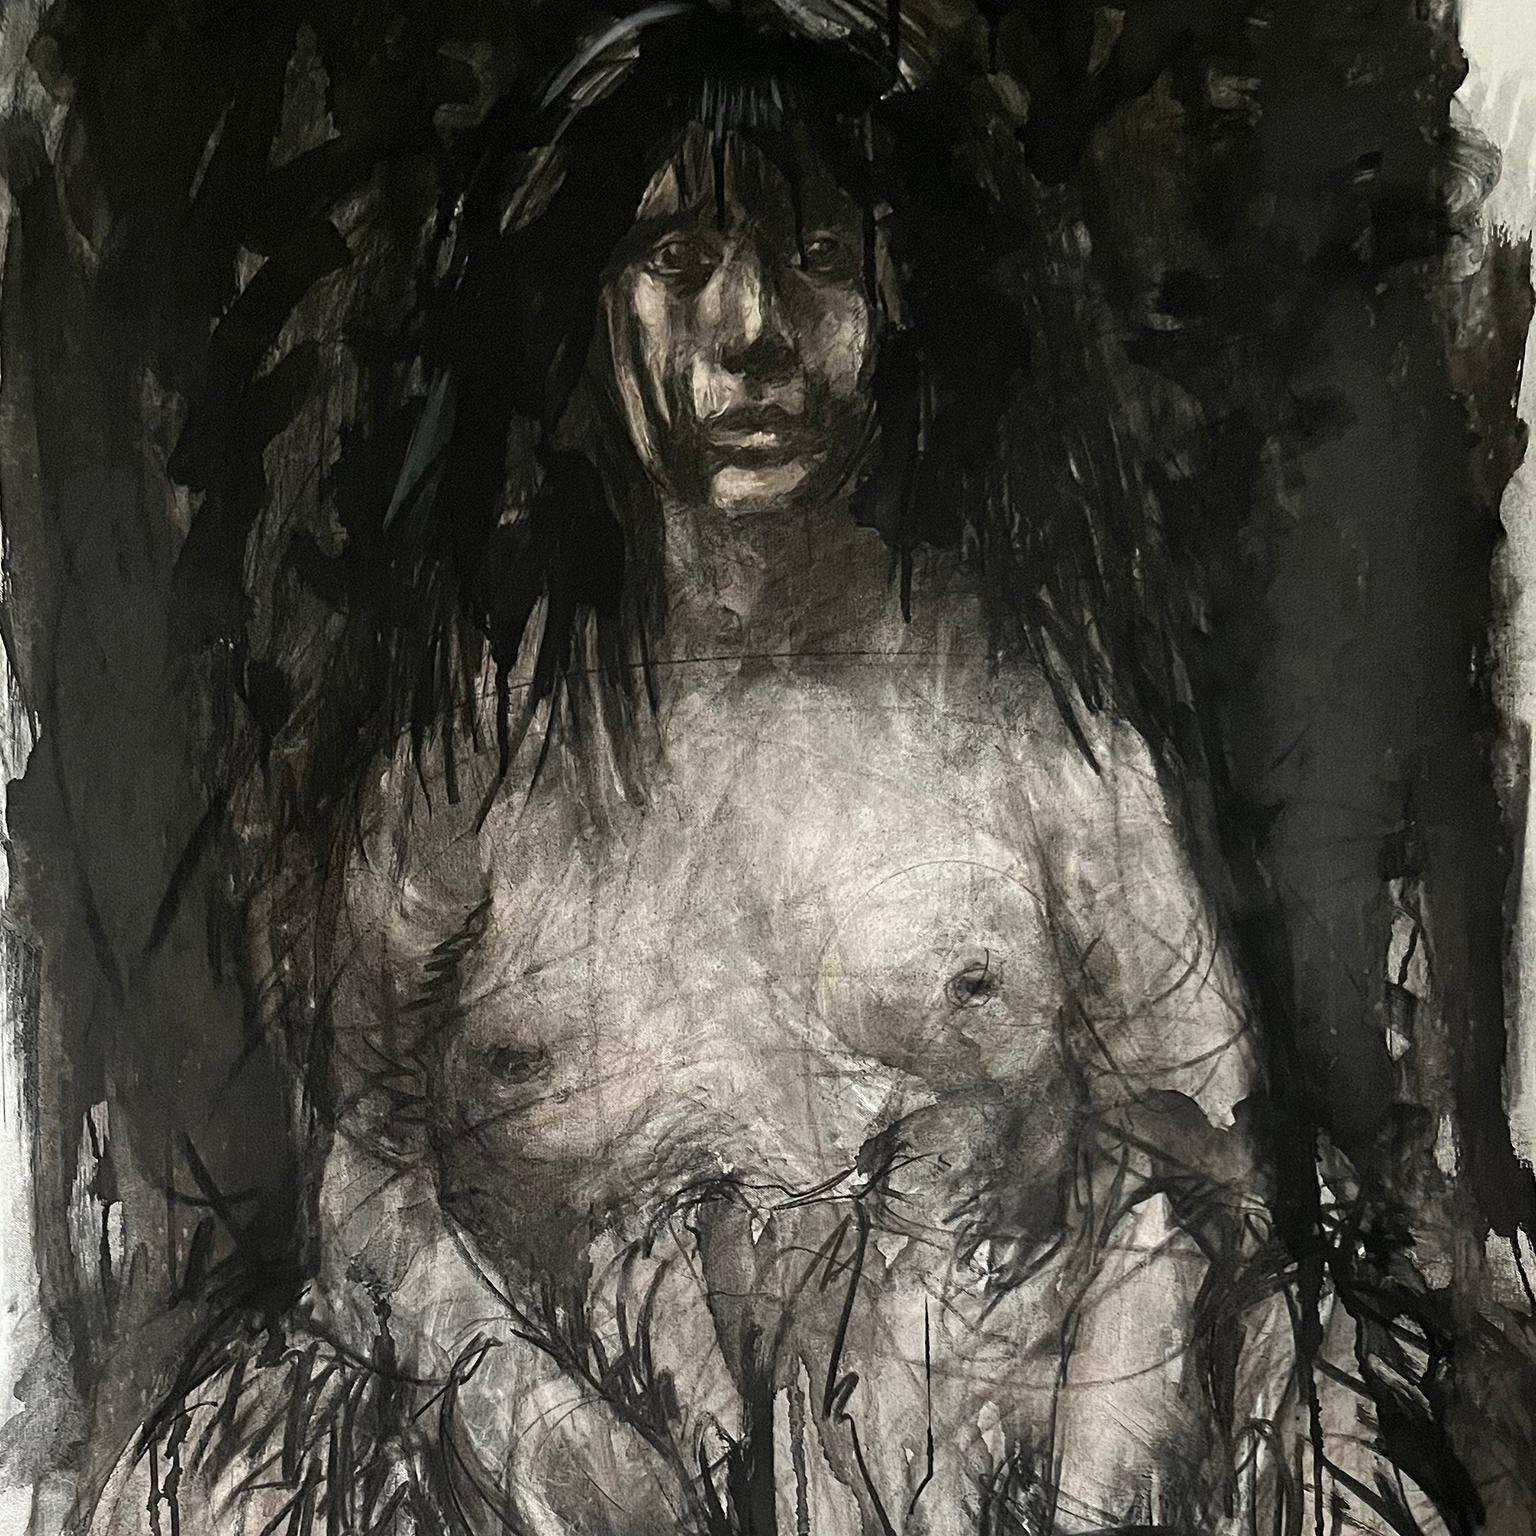 Beautiful Painting of a woman in black charcoal and ink on canvas by Dutch artist. The dimensions are 215 cm Long x 97 cm W, attached to wood of 110 cm long.

For transport on a roll dimensions, diameter 15 cm and in carton box 100 cm x 20 cm

Free